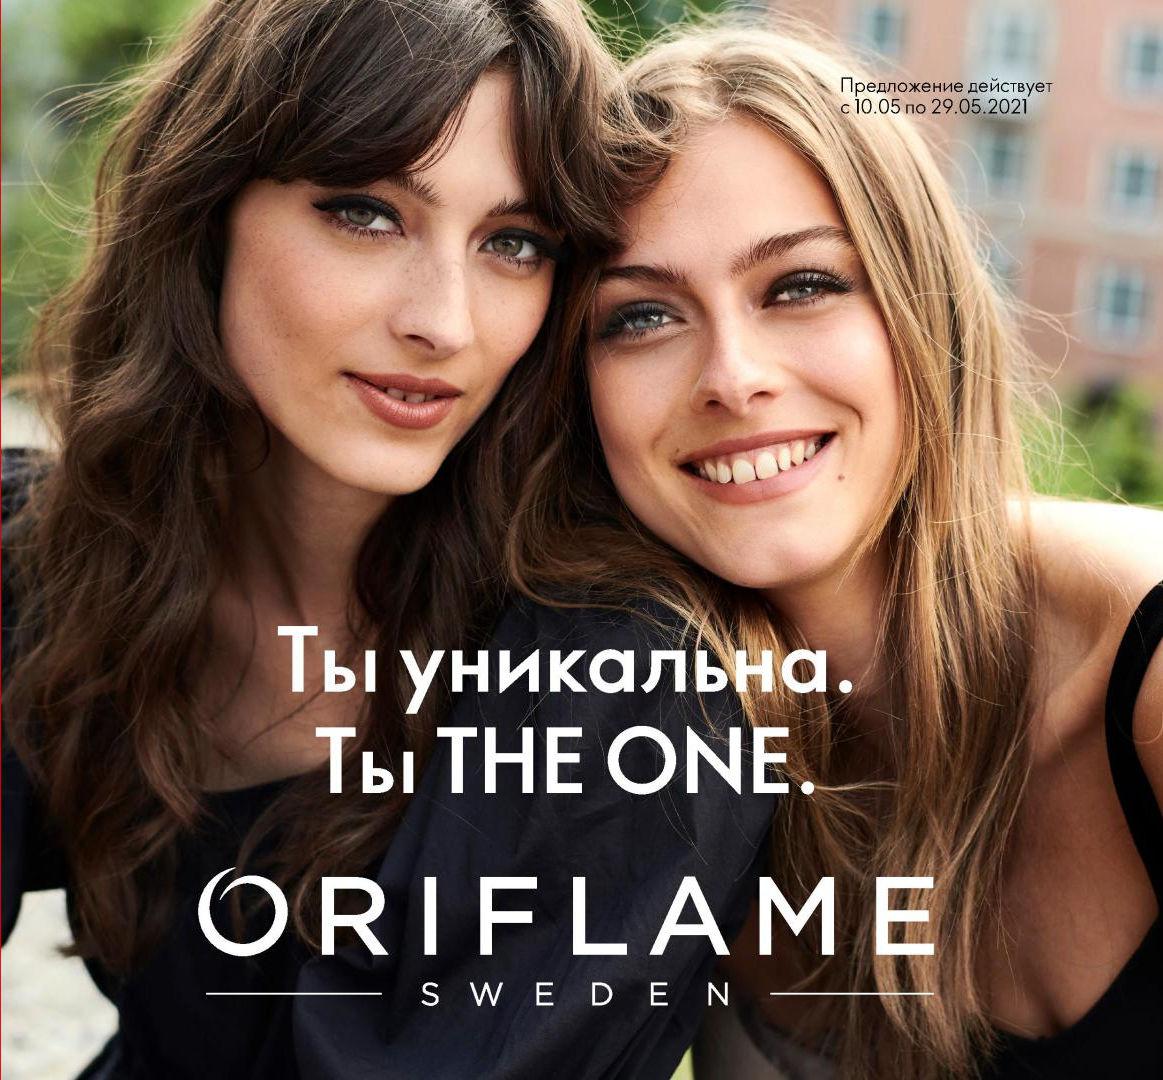    8.05.   Oriflame!    1!!! G.Gold , 287  740,   - 431  1300, /    158  480,   237  500  ..-.13%